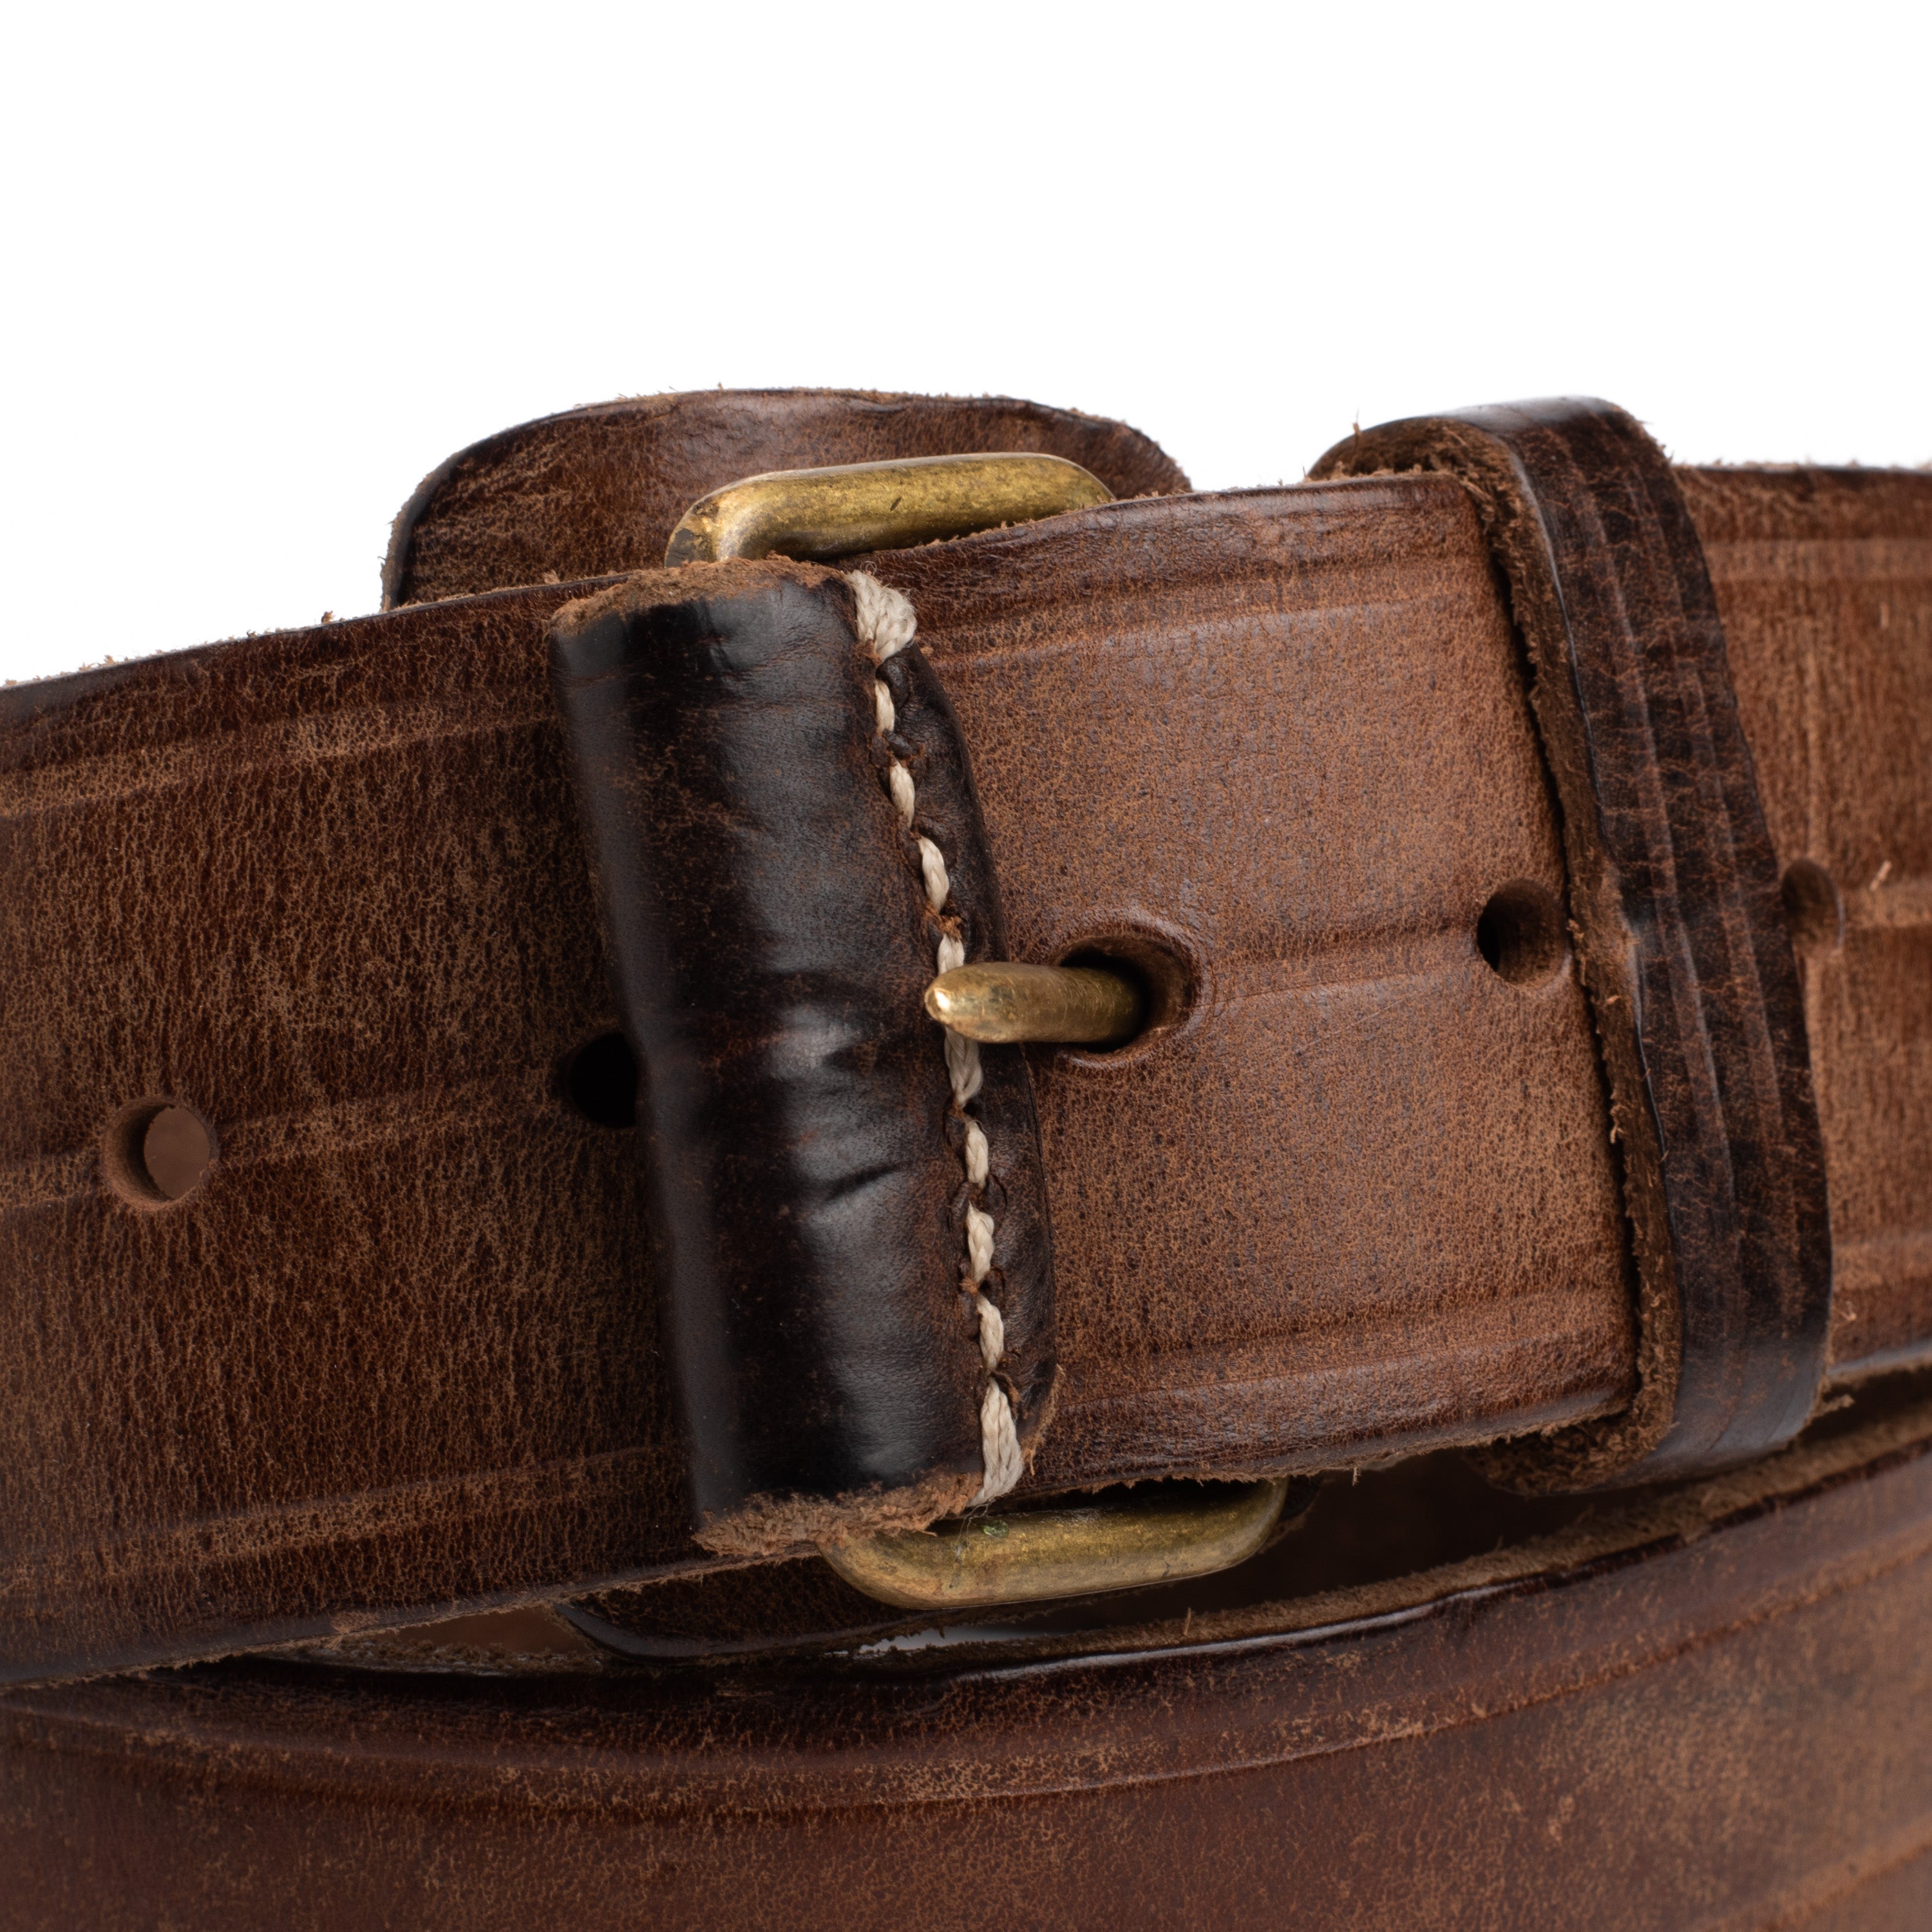 THEDI LEATHERS "Legendary" Brown Handmade Thick Leather Belt NEW 34-38 THEDI LEATHERS